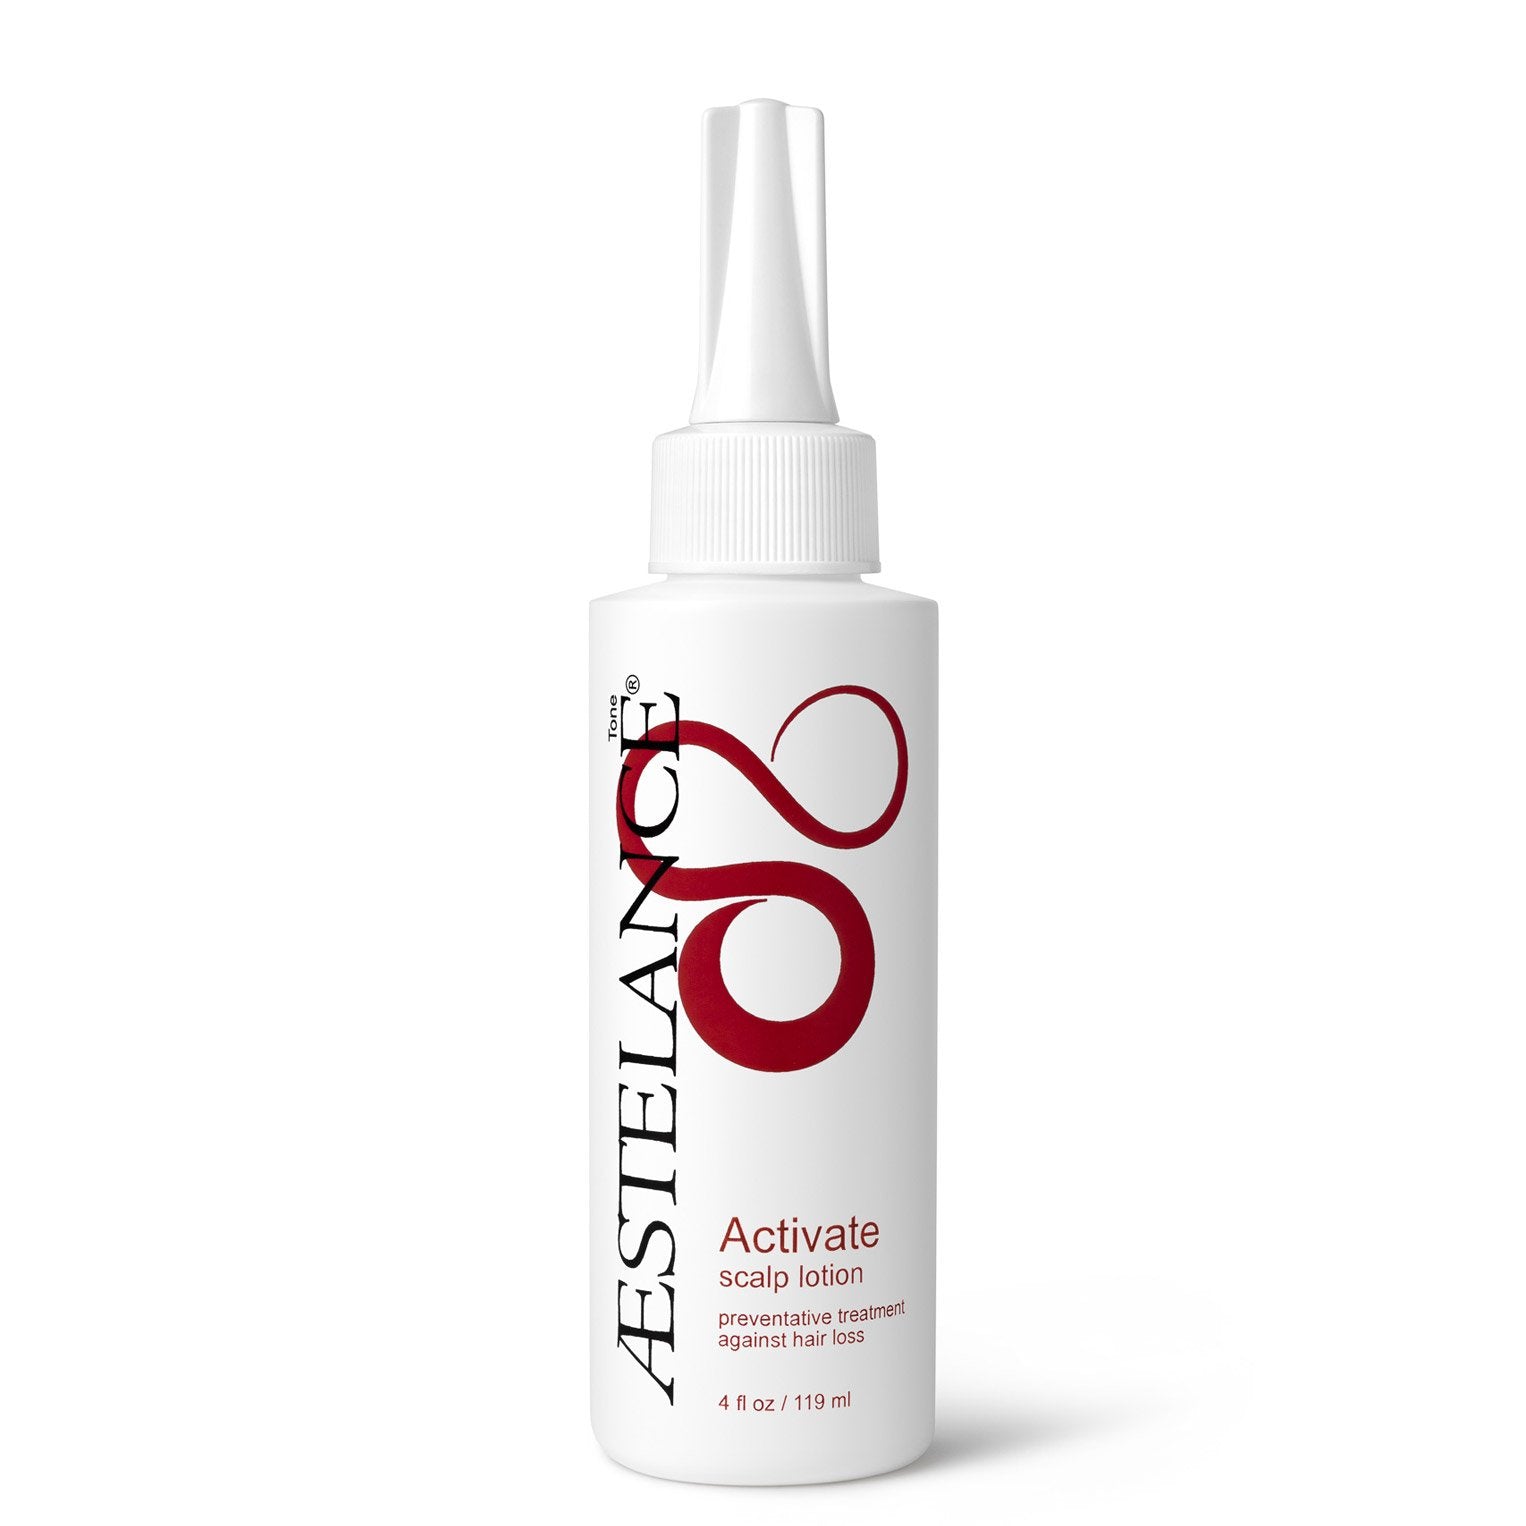 Aestelance Hair Care: Individual solution for each type of hair